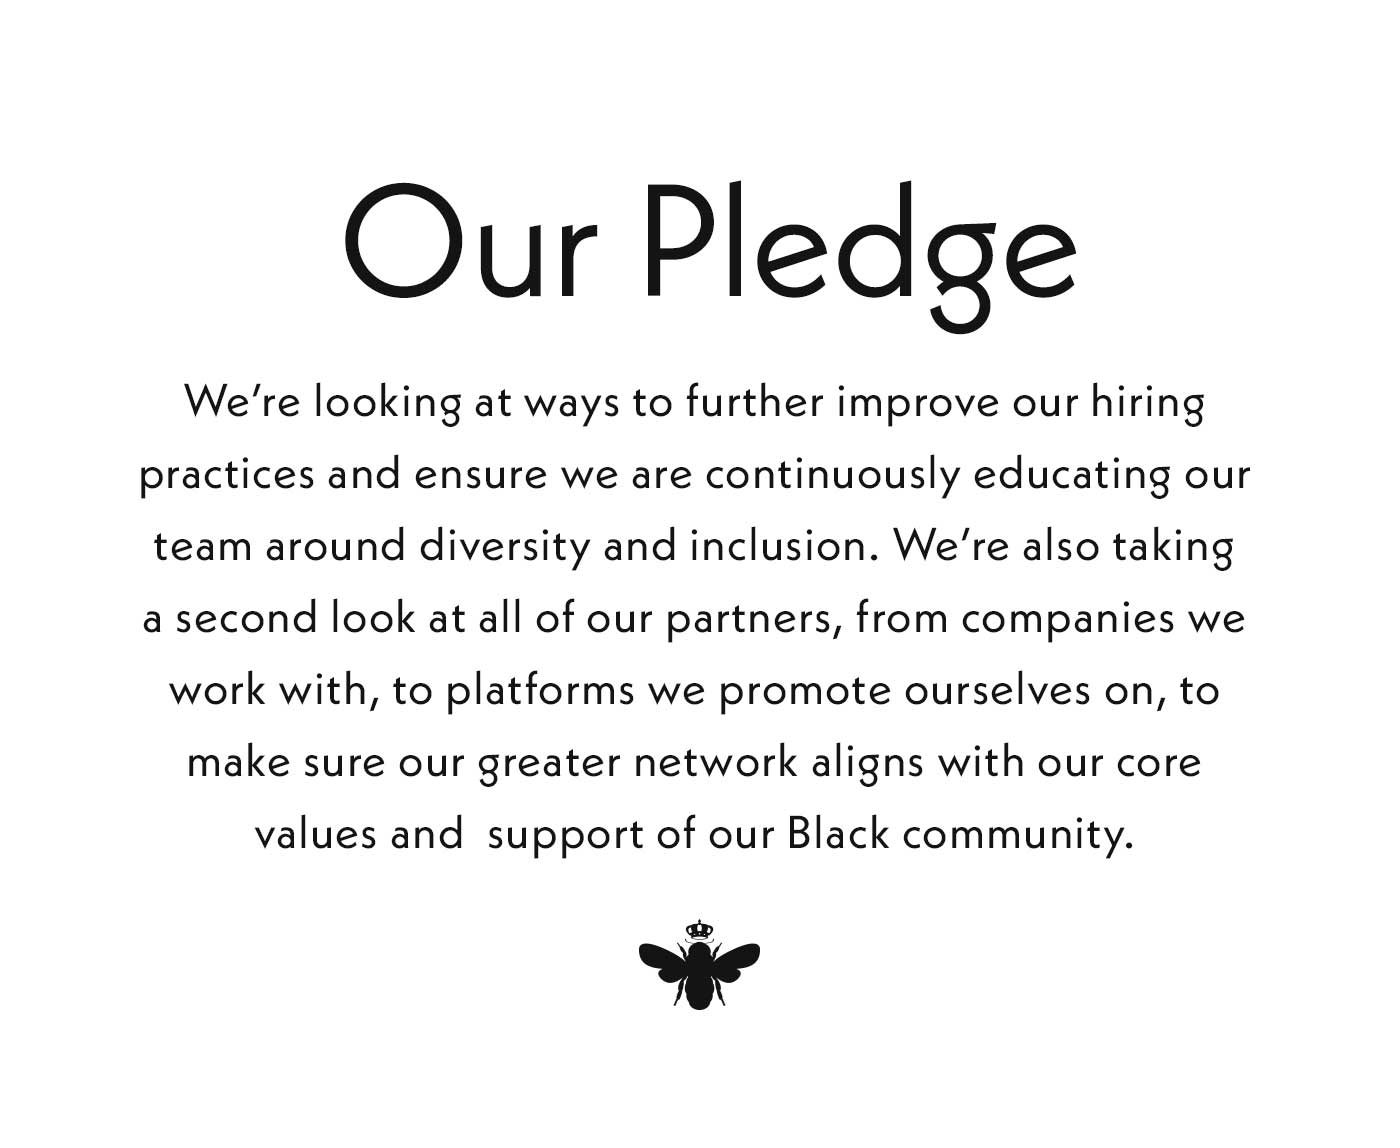 Our Pledge. We're looking at ways to further improve our hiring practices and ensure we are continuously educating our team around diversity and inclusion. We're also taking a second look at all of our partners, from companies we work with, to platforms we promote ourselves on, to make sure our greater network aligns with our core values and support of our Black community.